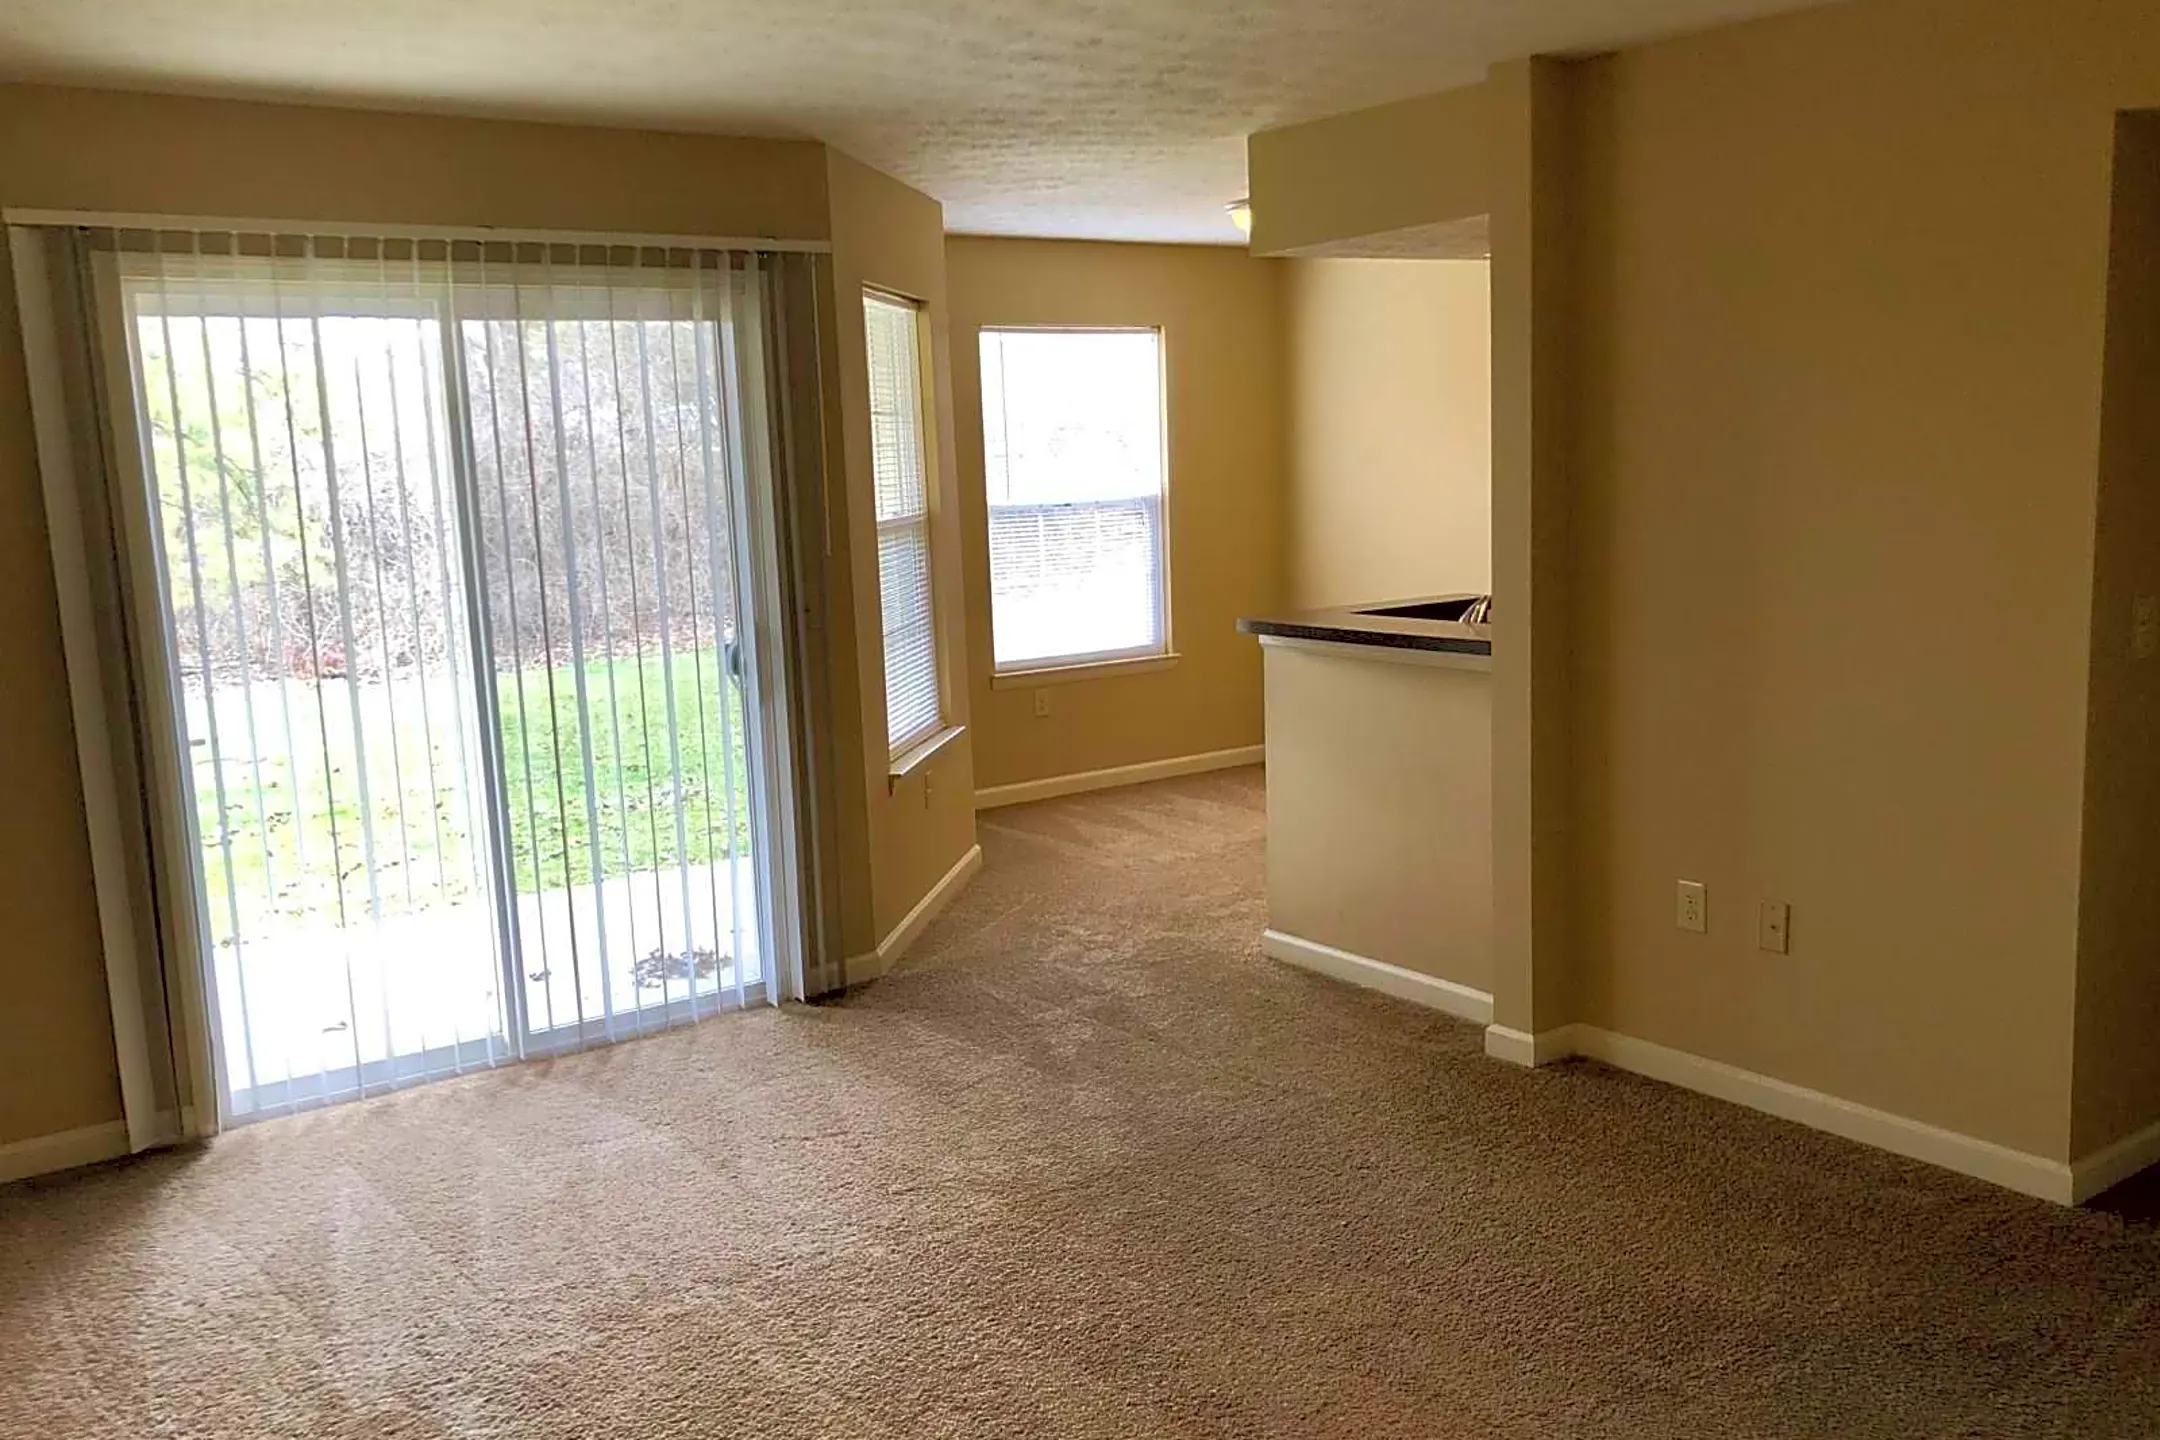 Living Room - Steeplechase Apartments - Centerville, OH